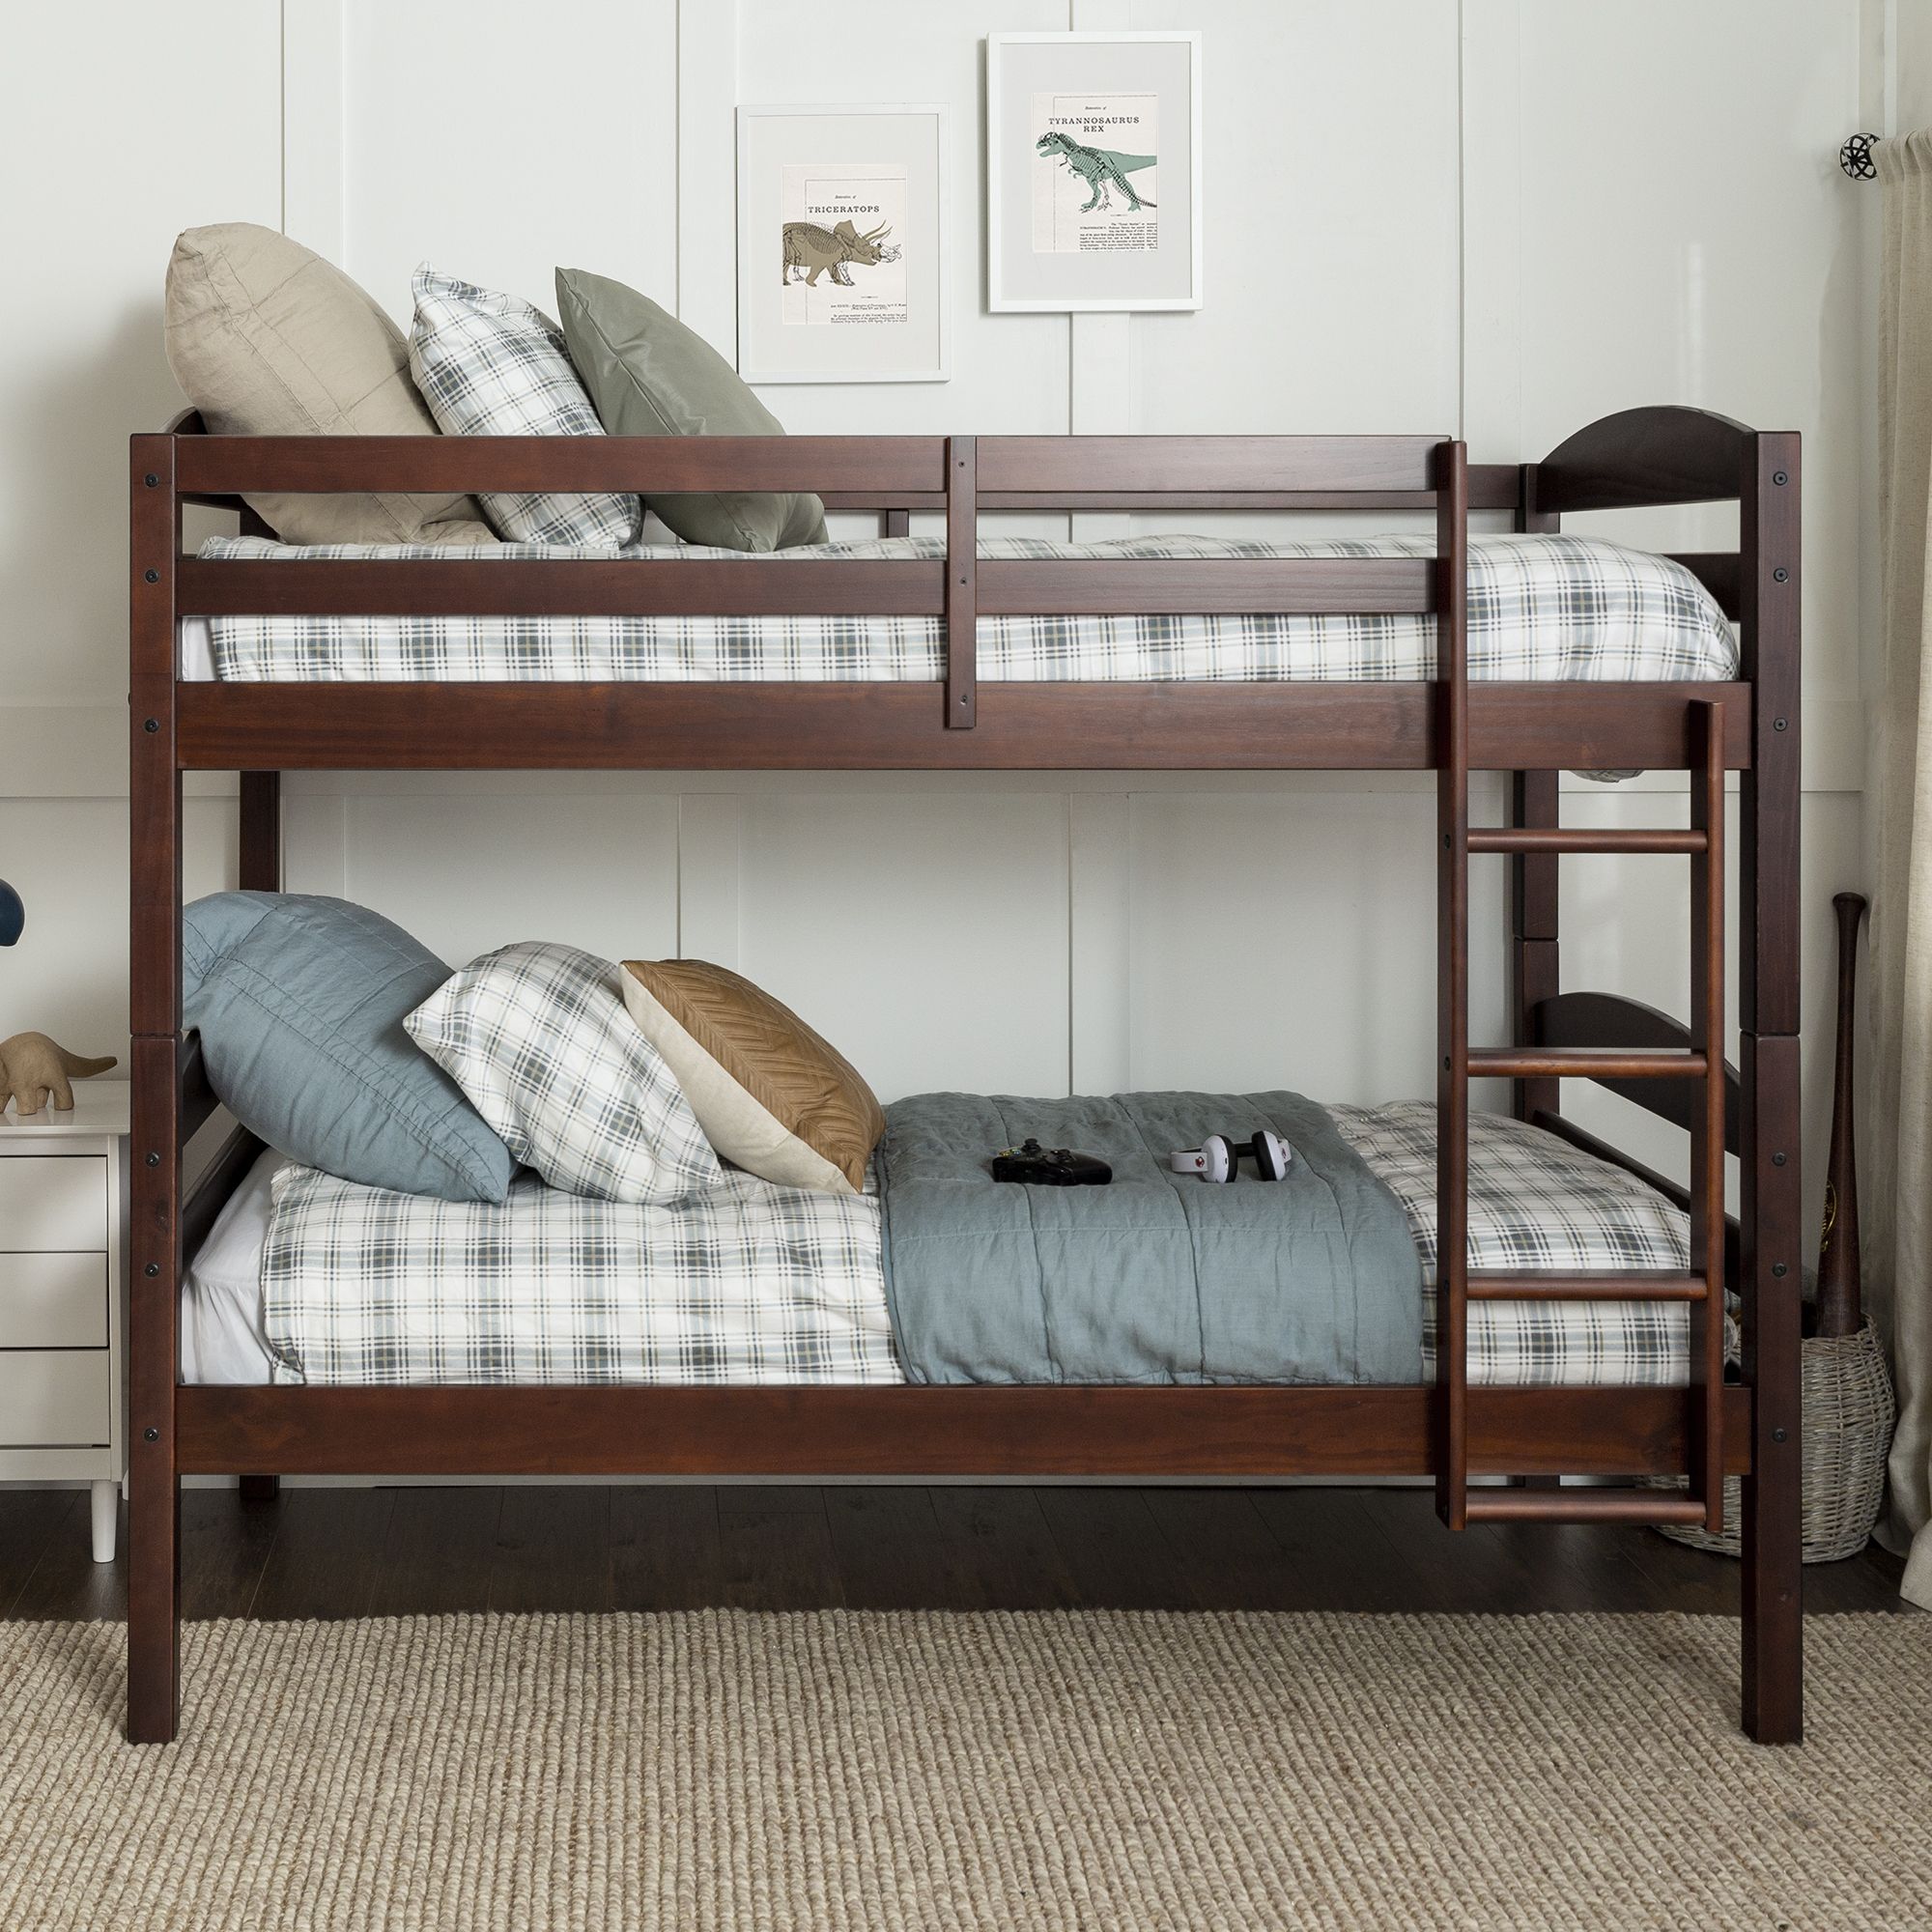 cheapest place to buy bunk beds